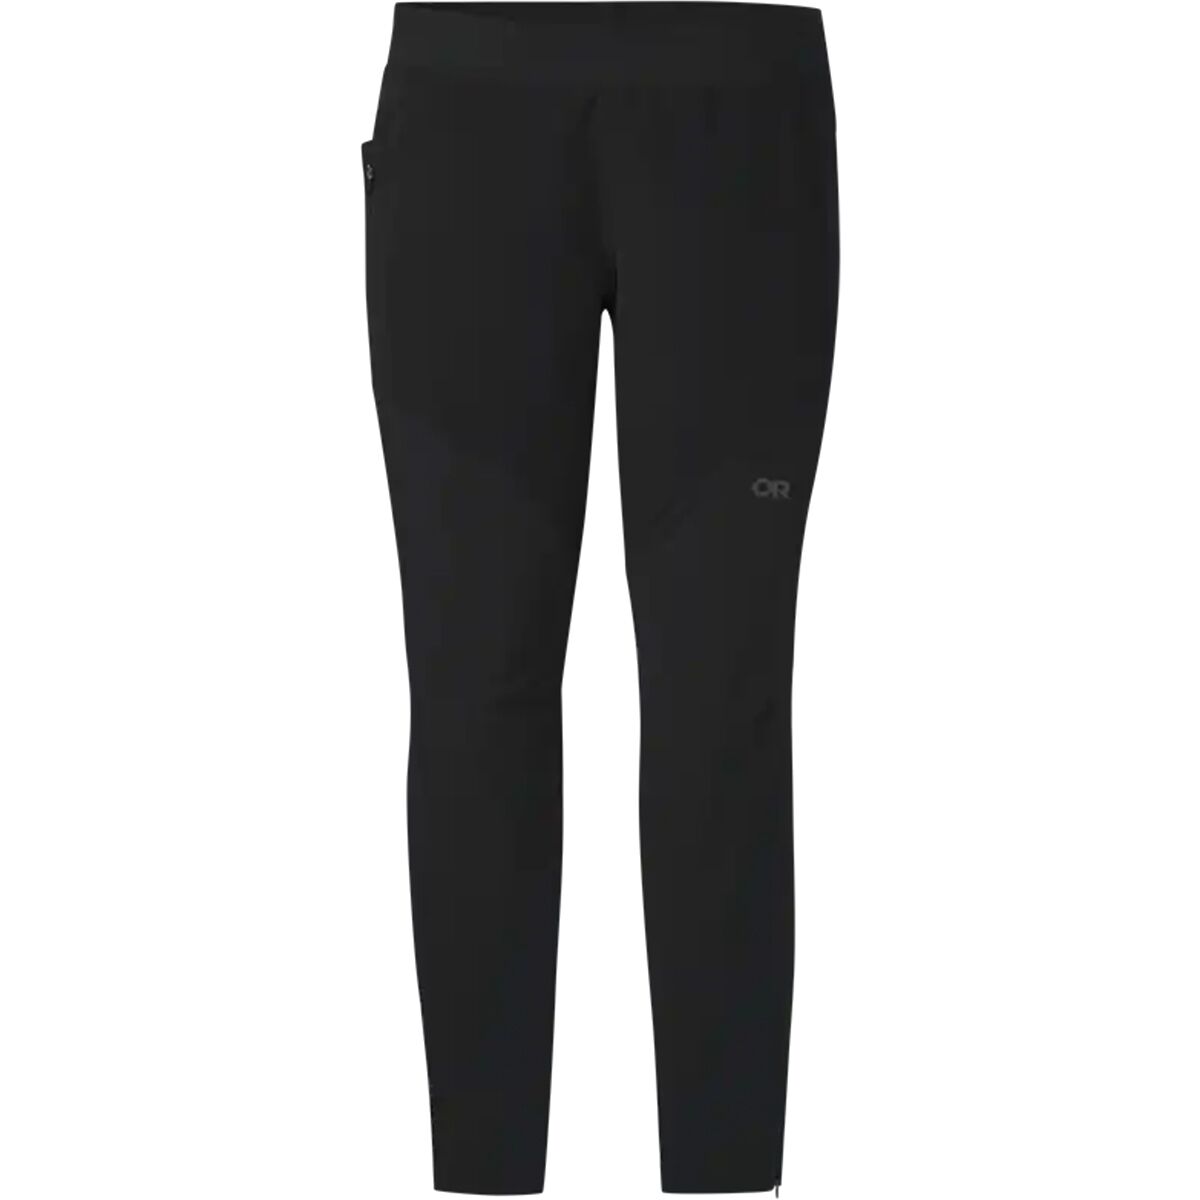 Outdoor Research Methow Pant - Women's